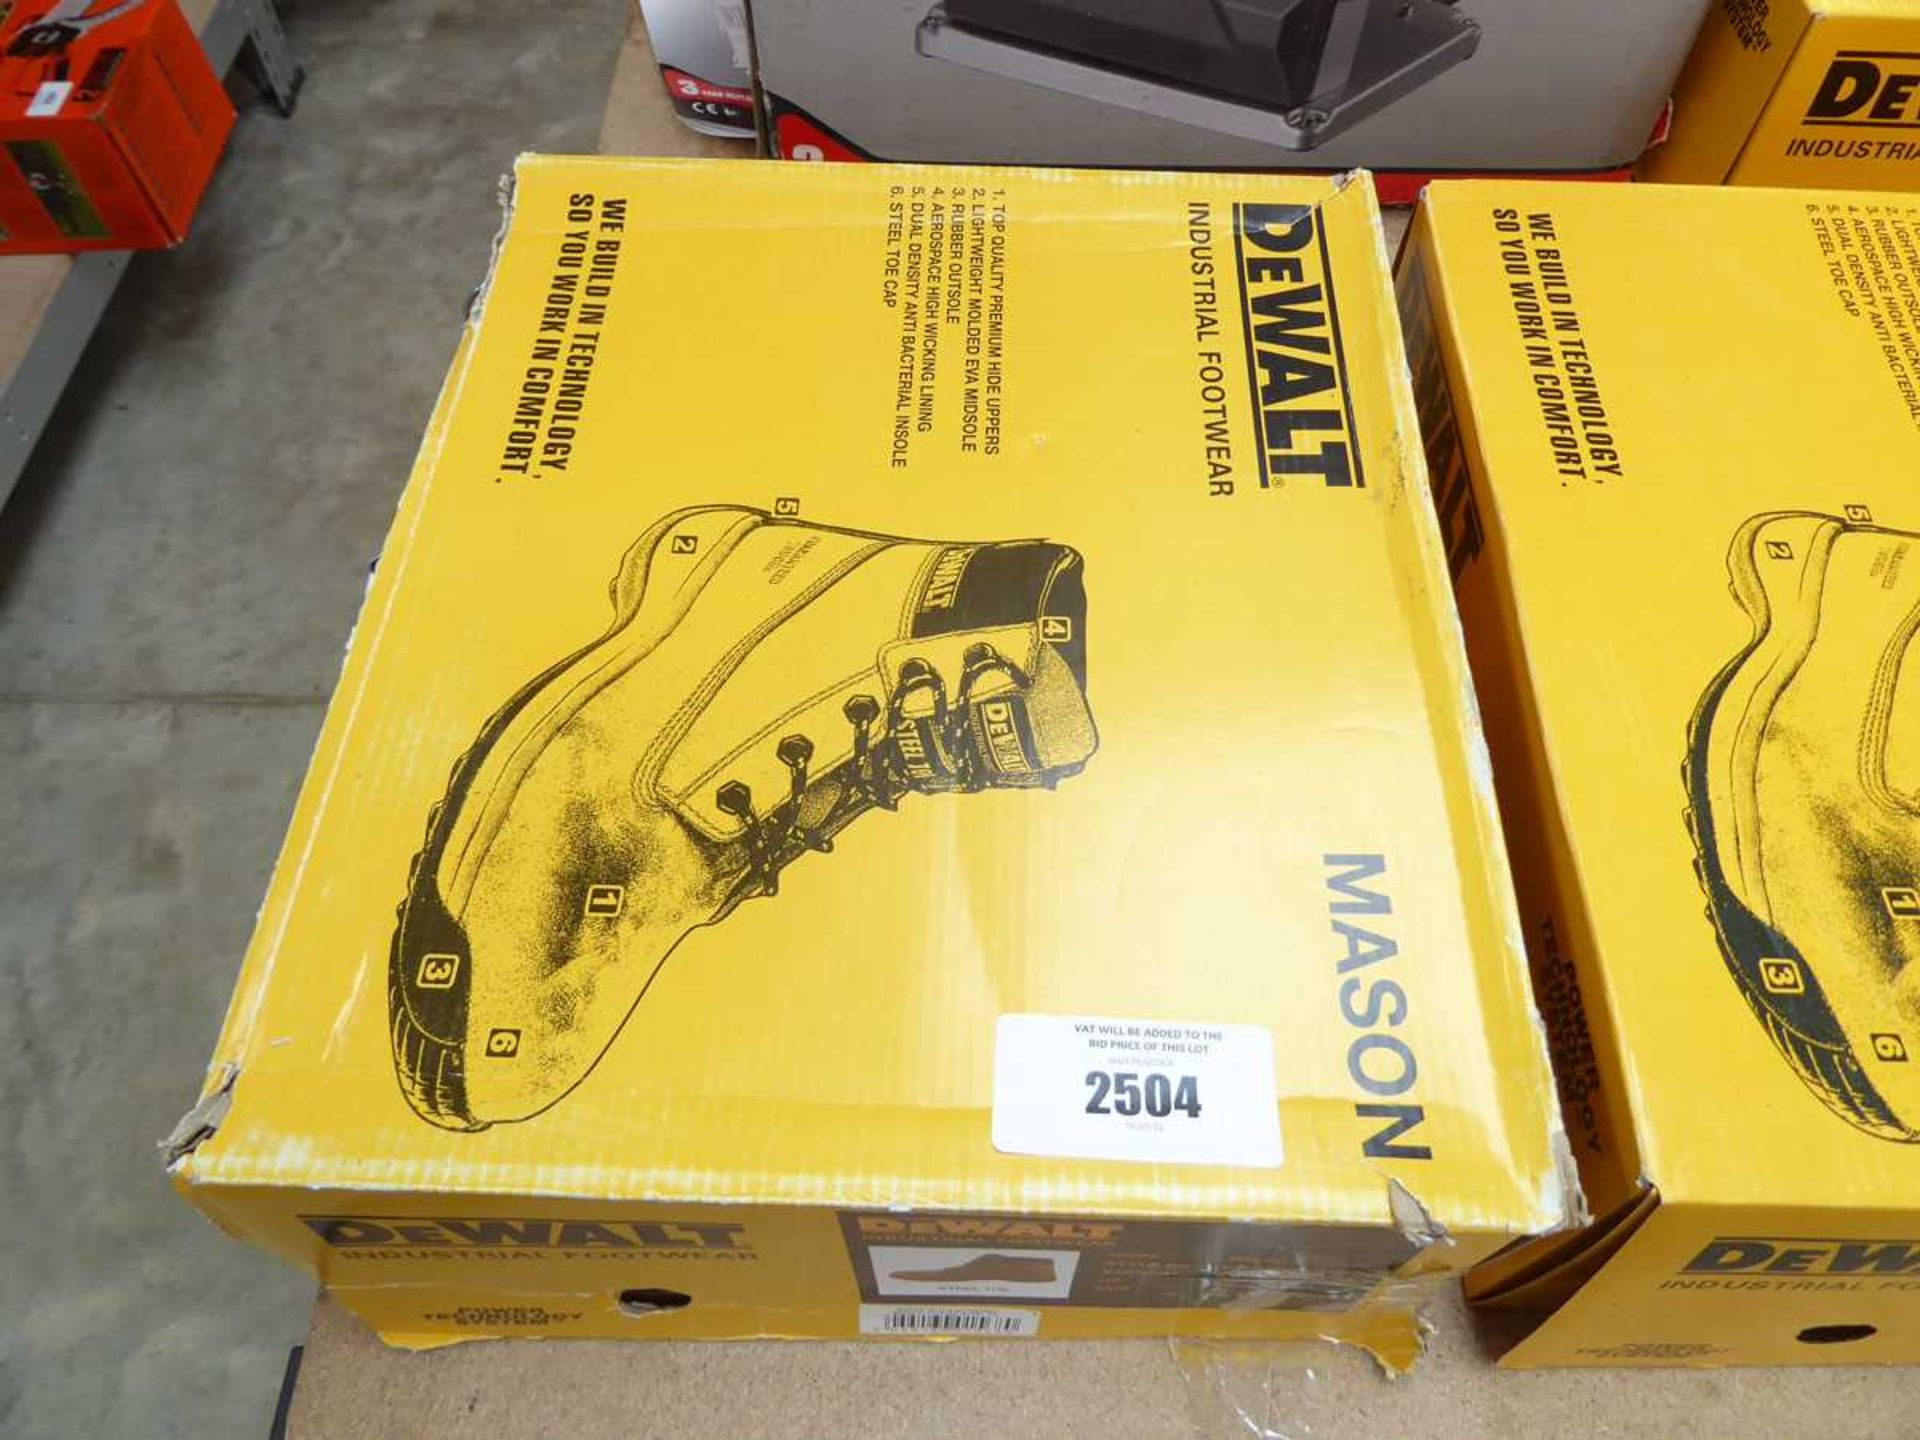 +VAT Boxed pair of DeWalt Mason steel toe safety boots in tan (size 12)